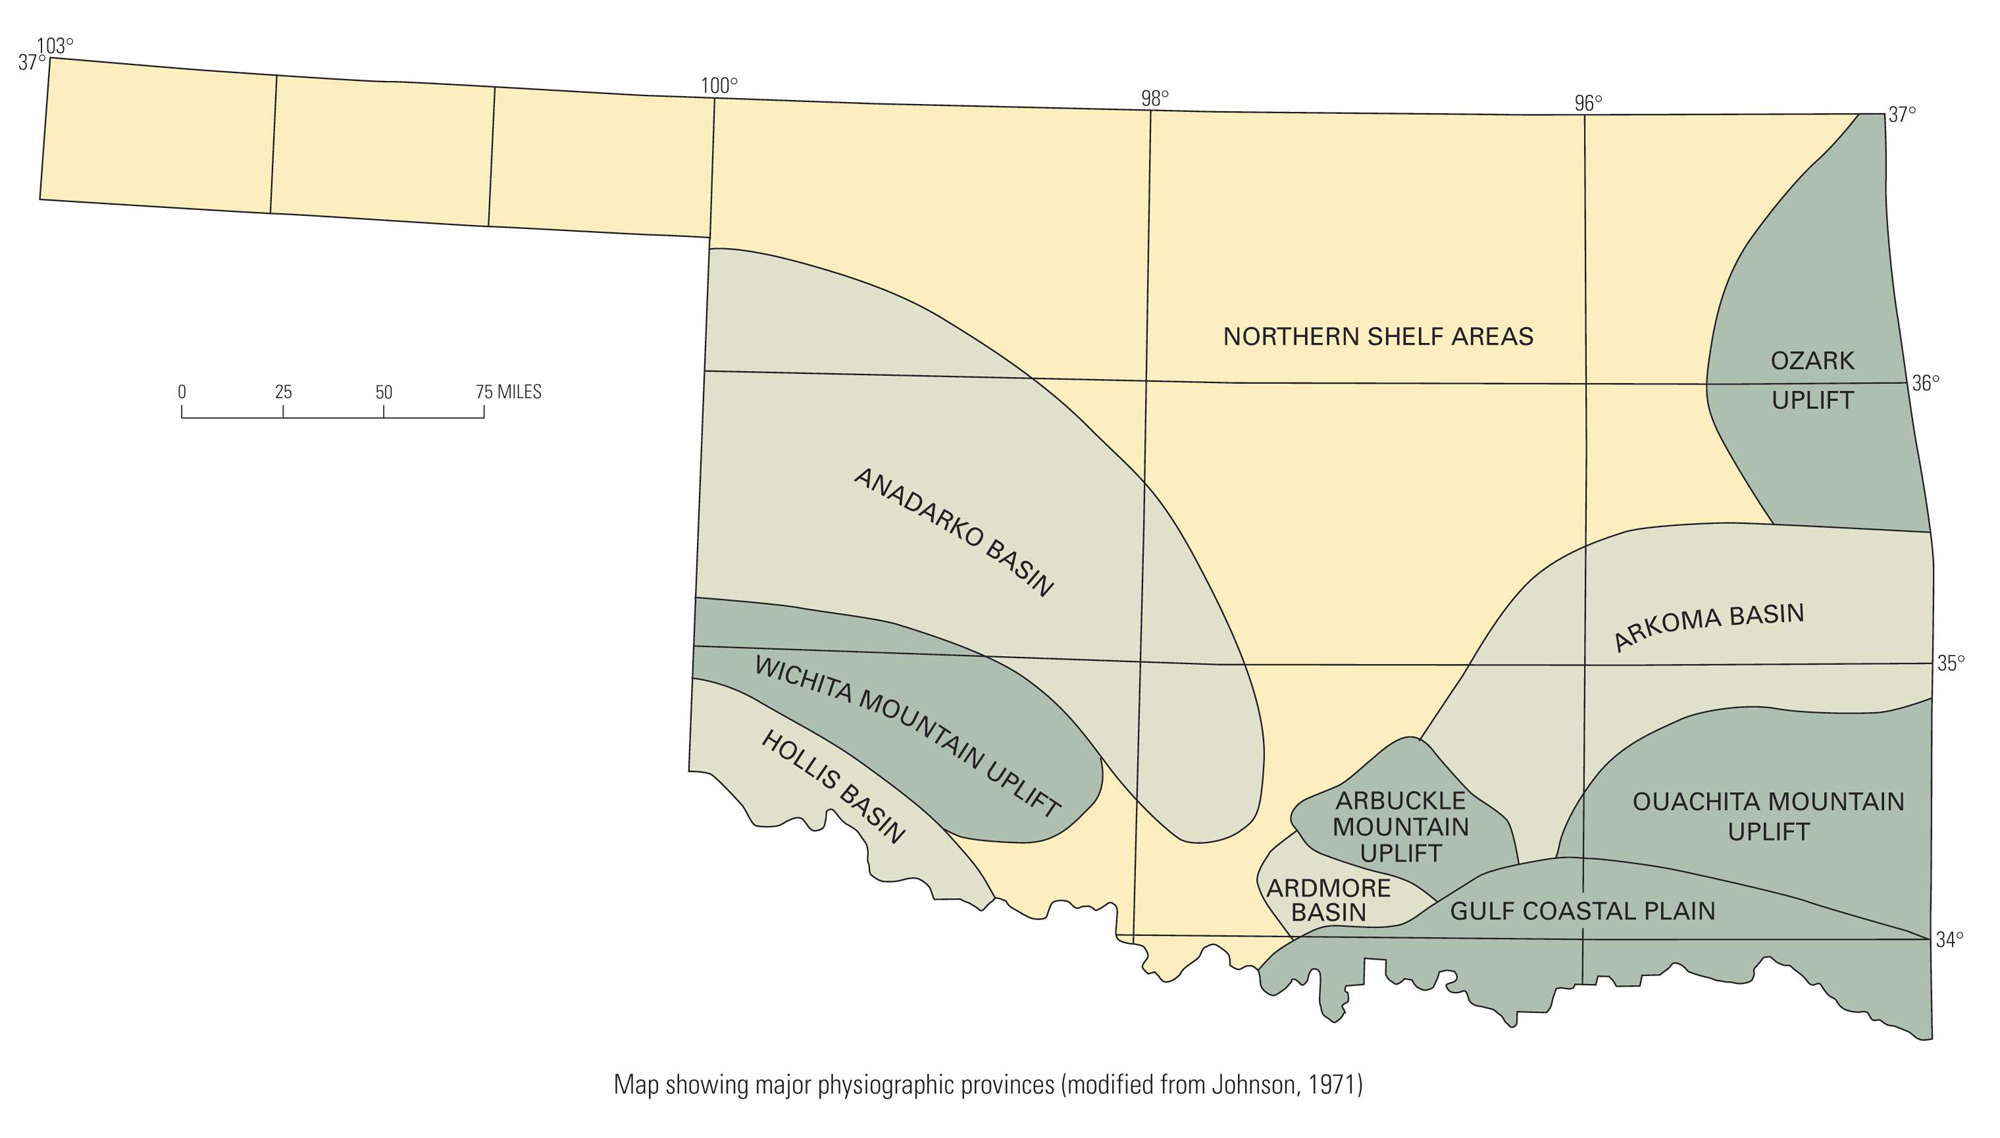 Map of Oklahoma showing the locations of uplifts and basins in the state. The Wichita Mountain uplift is in the southwestern part of the state, whereas the Arbuckle Mountain uplift is the the south-central part of the state.